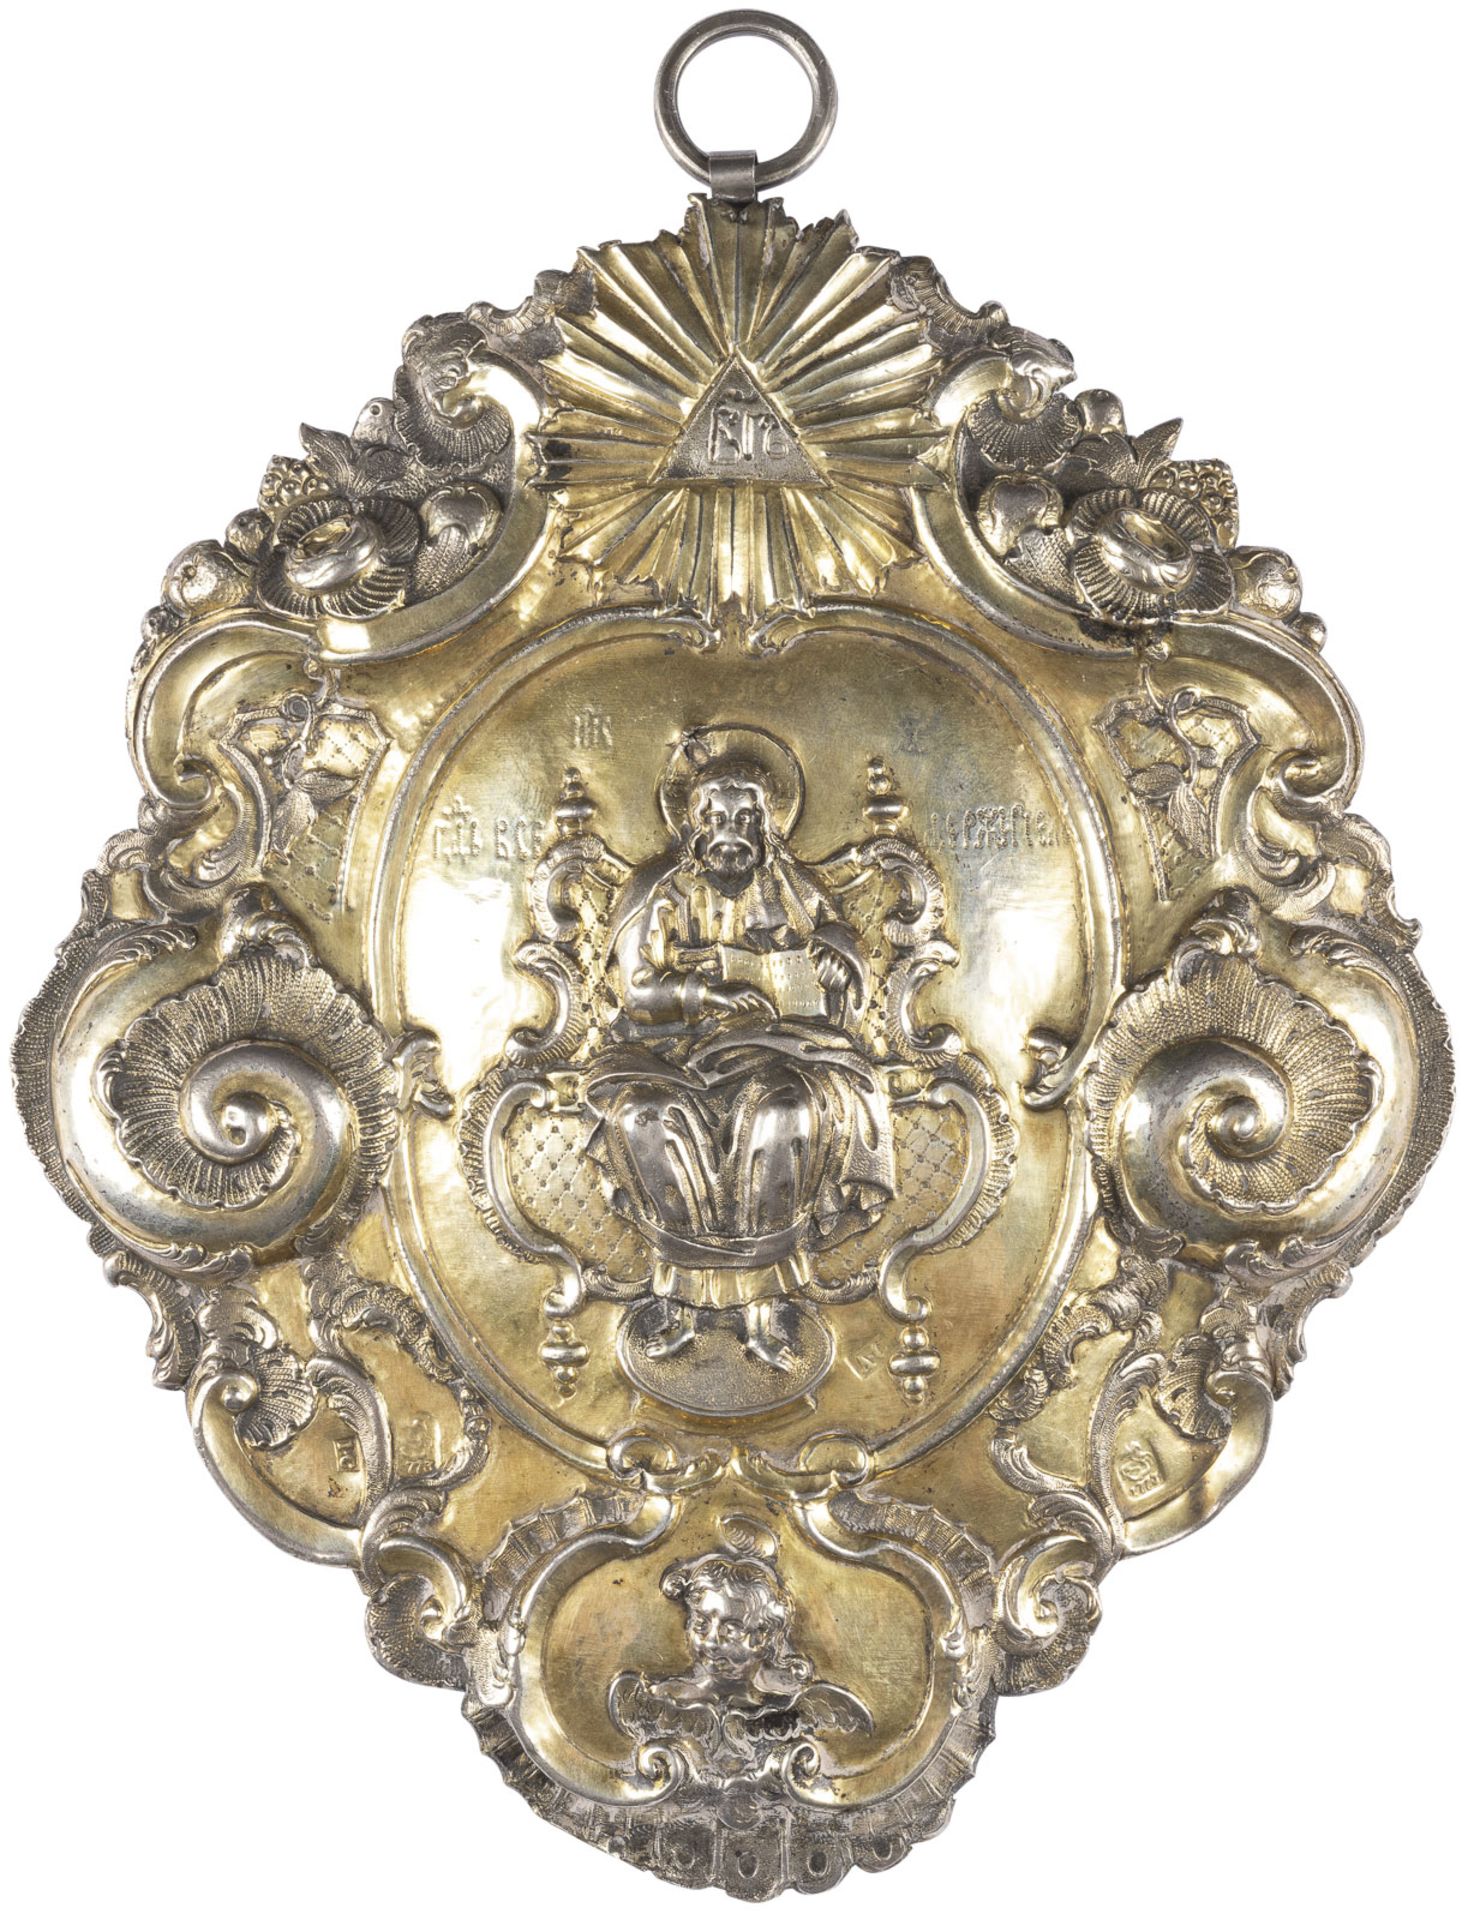 A SILVER-GILT PLAQUE SHOWING THE ENTHRONED CHRIST